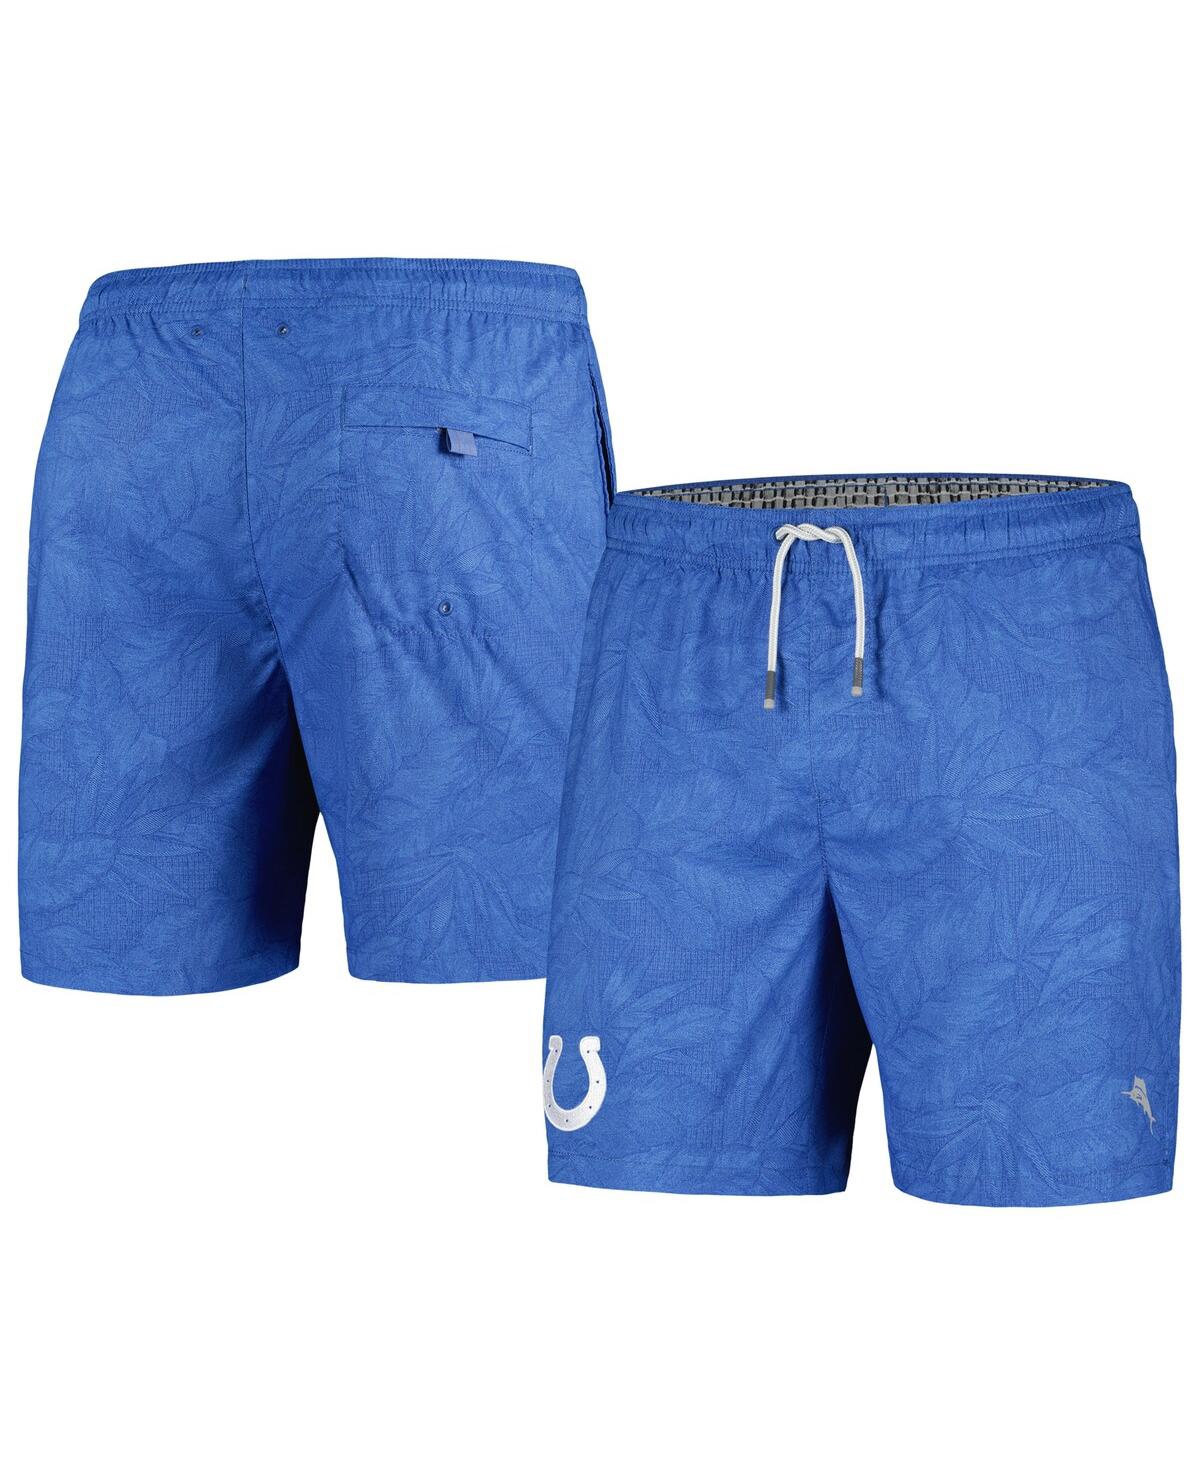 Men's Royal Indianapolis Colts Naples Layered Leaves Swim Trunks - Colts-lt B